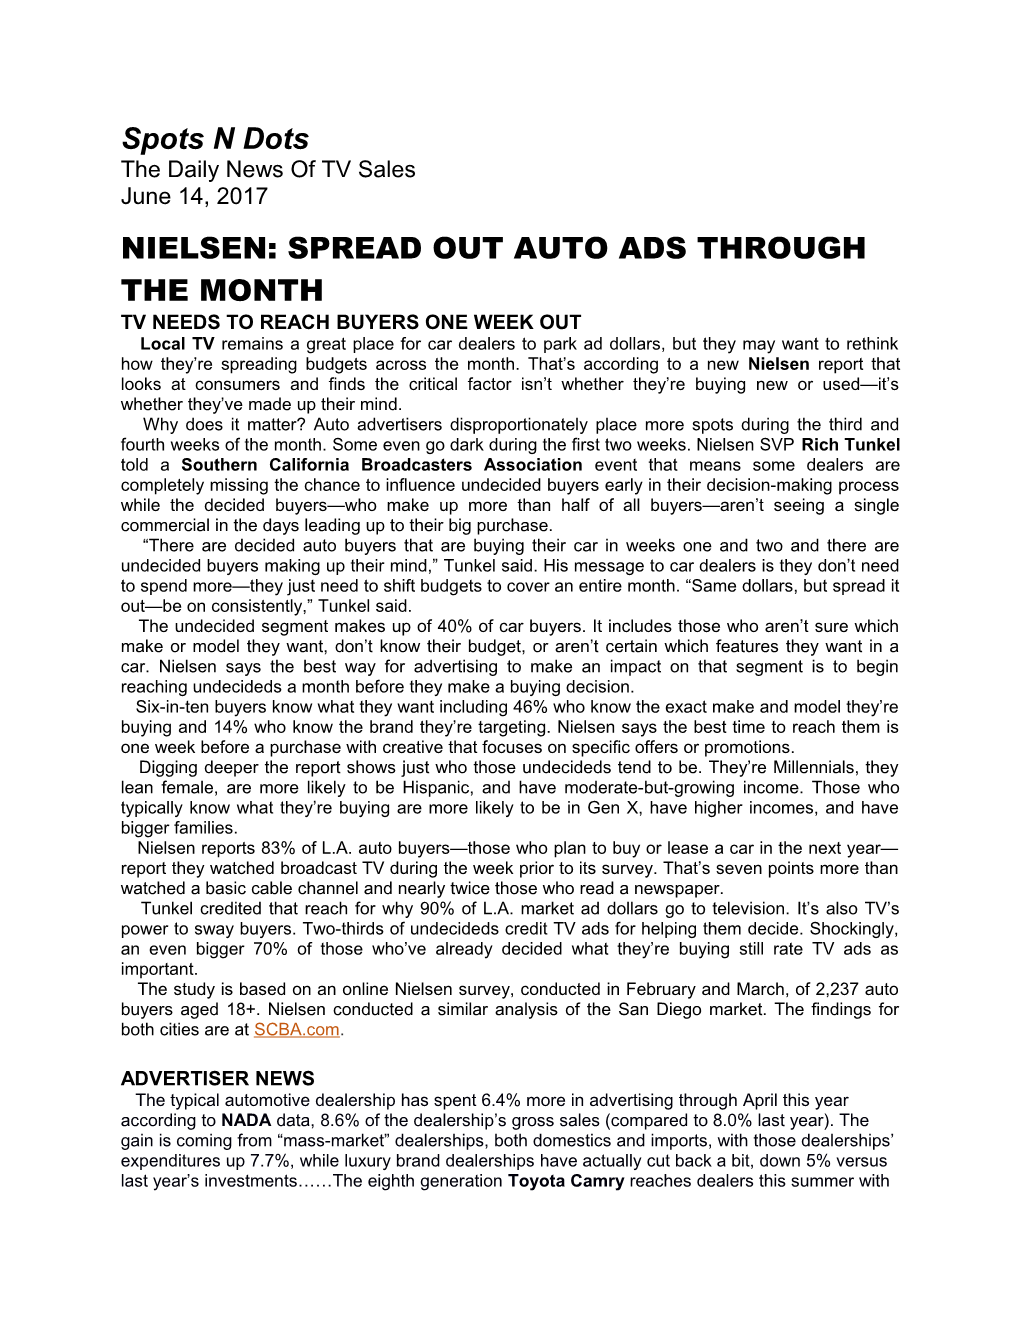 Nielsen: Spread out Auto Ads Through the Month